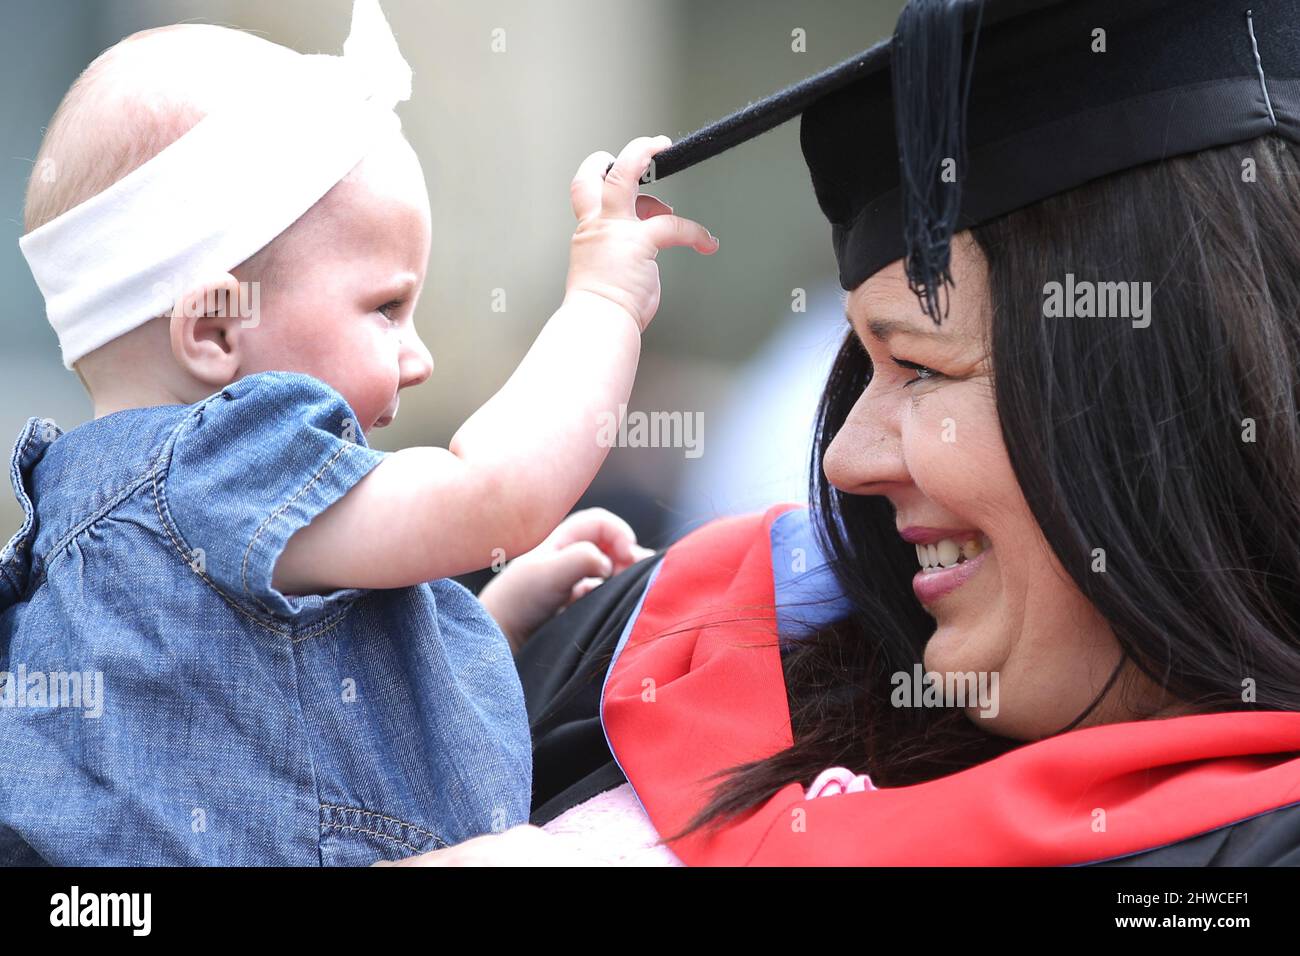 An European mother graduate posing for photographs with her baby daughter at her graduation day ceremony. This formal event where graduands (before) c Stock Photo